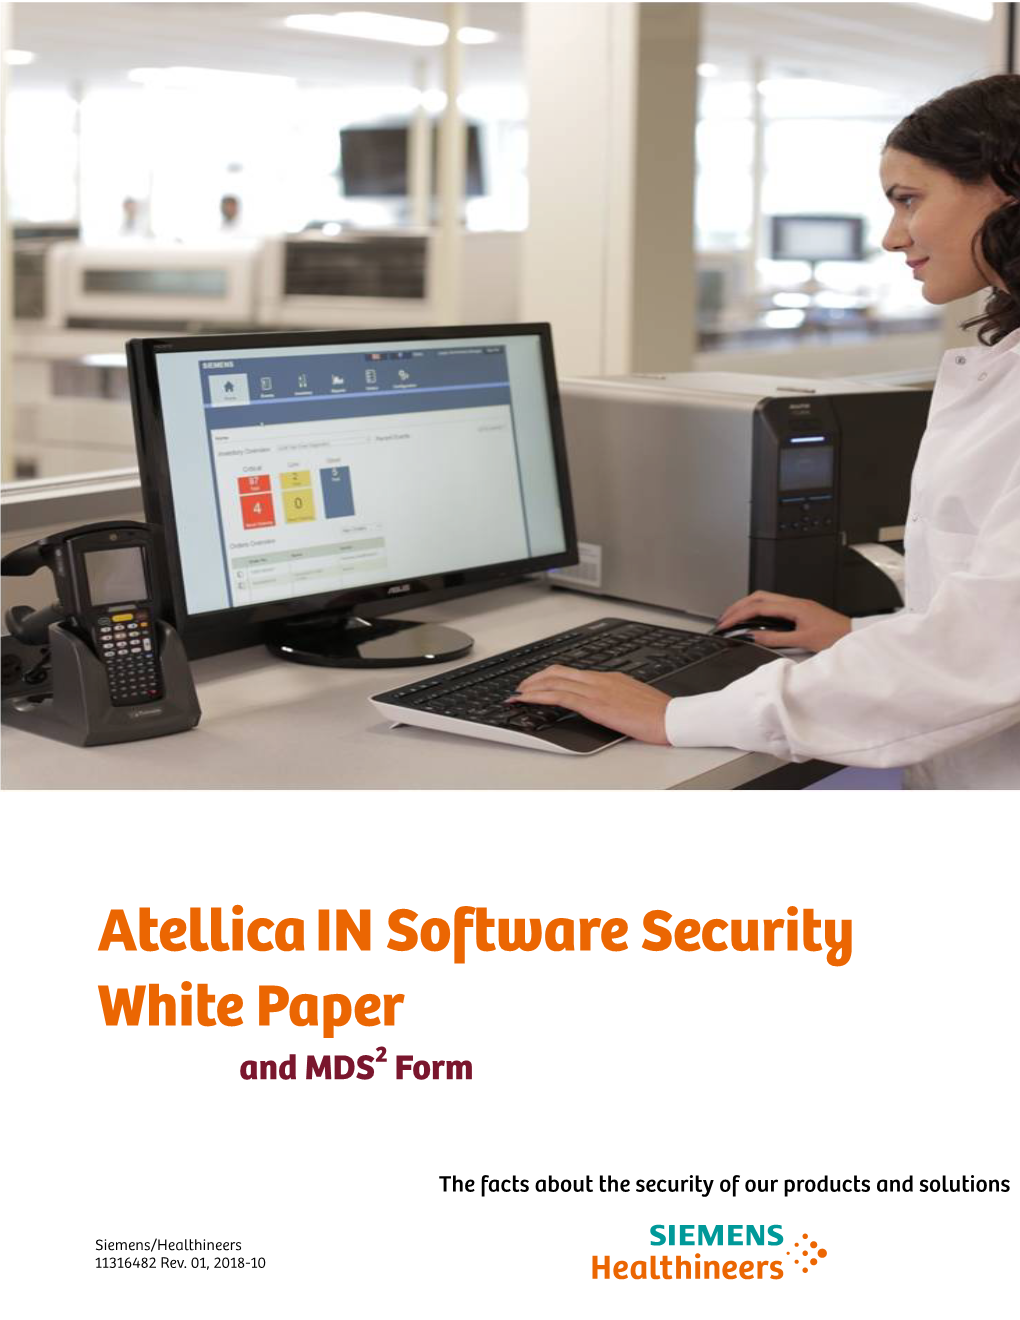 Atellica in Software Security White Paper and MDS2 Form